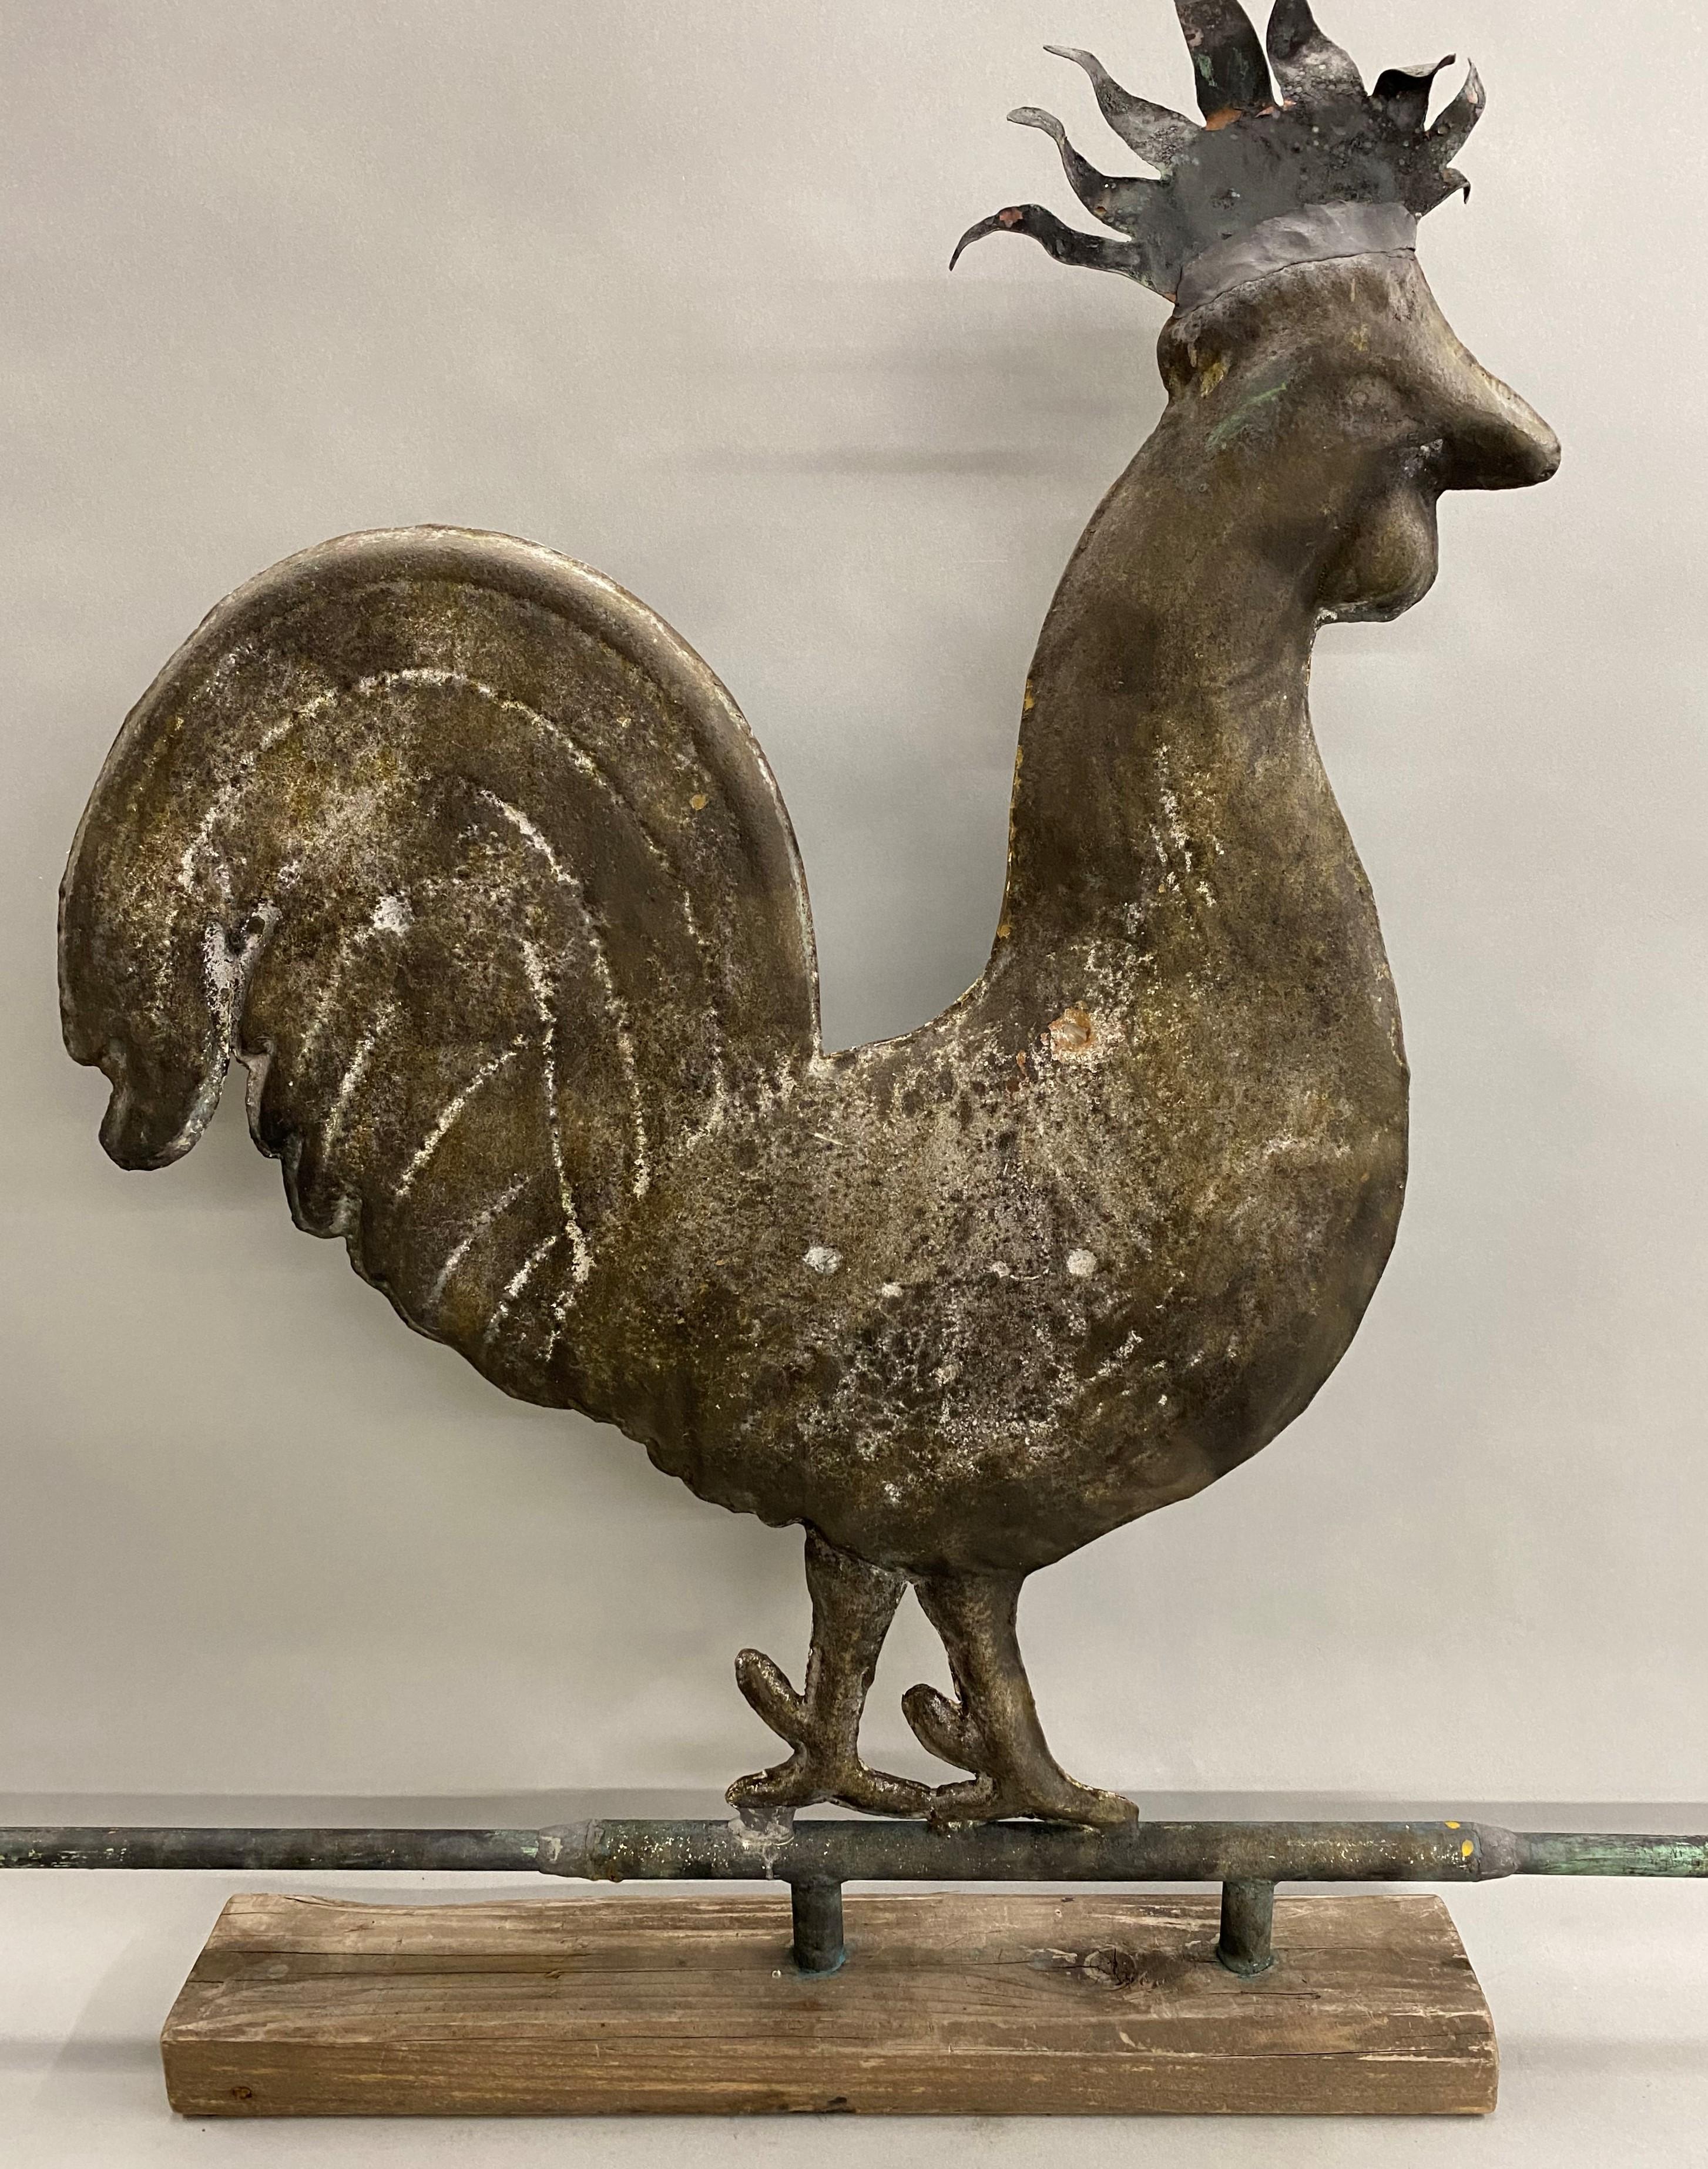 A fine example of a molded copper hollow body rooster weathervane on directional arrow, mounted on a weathered wooden display base, with nice detail on the arrow feathers and body structure. Dates to the 19th century in very good condition, with